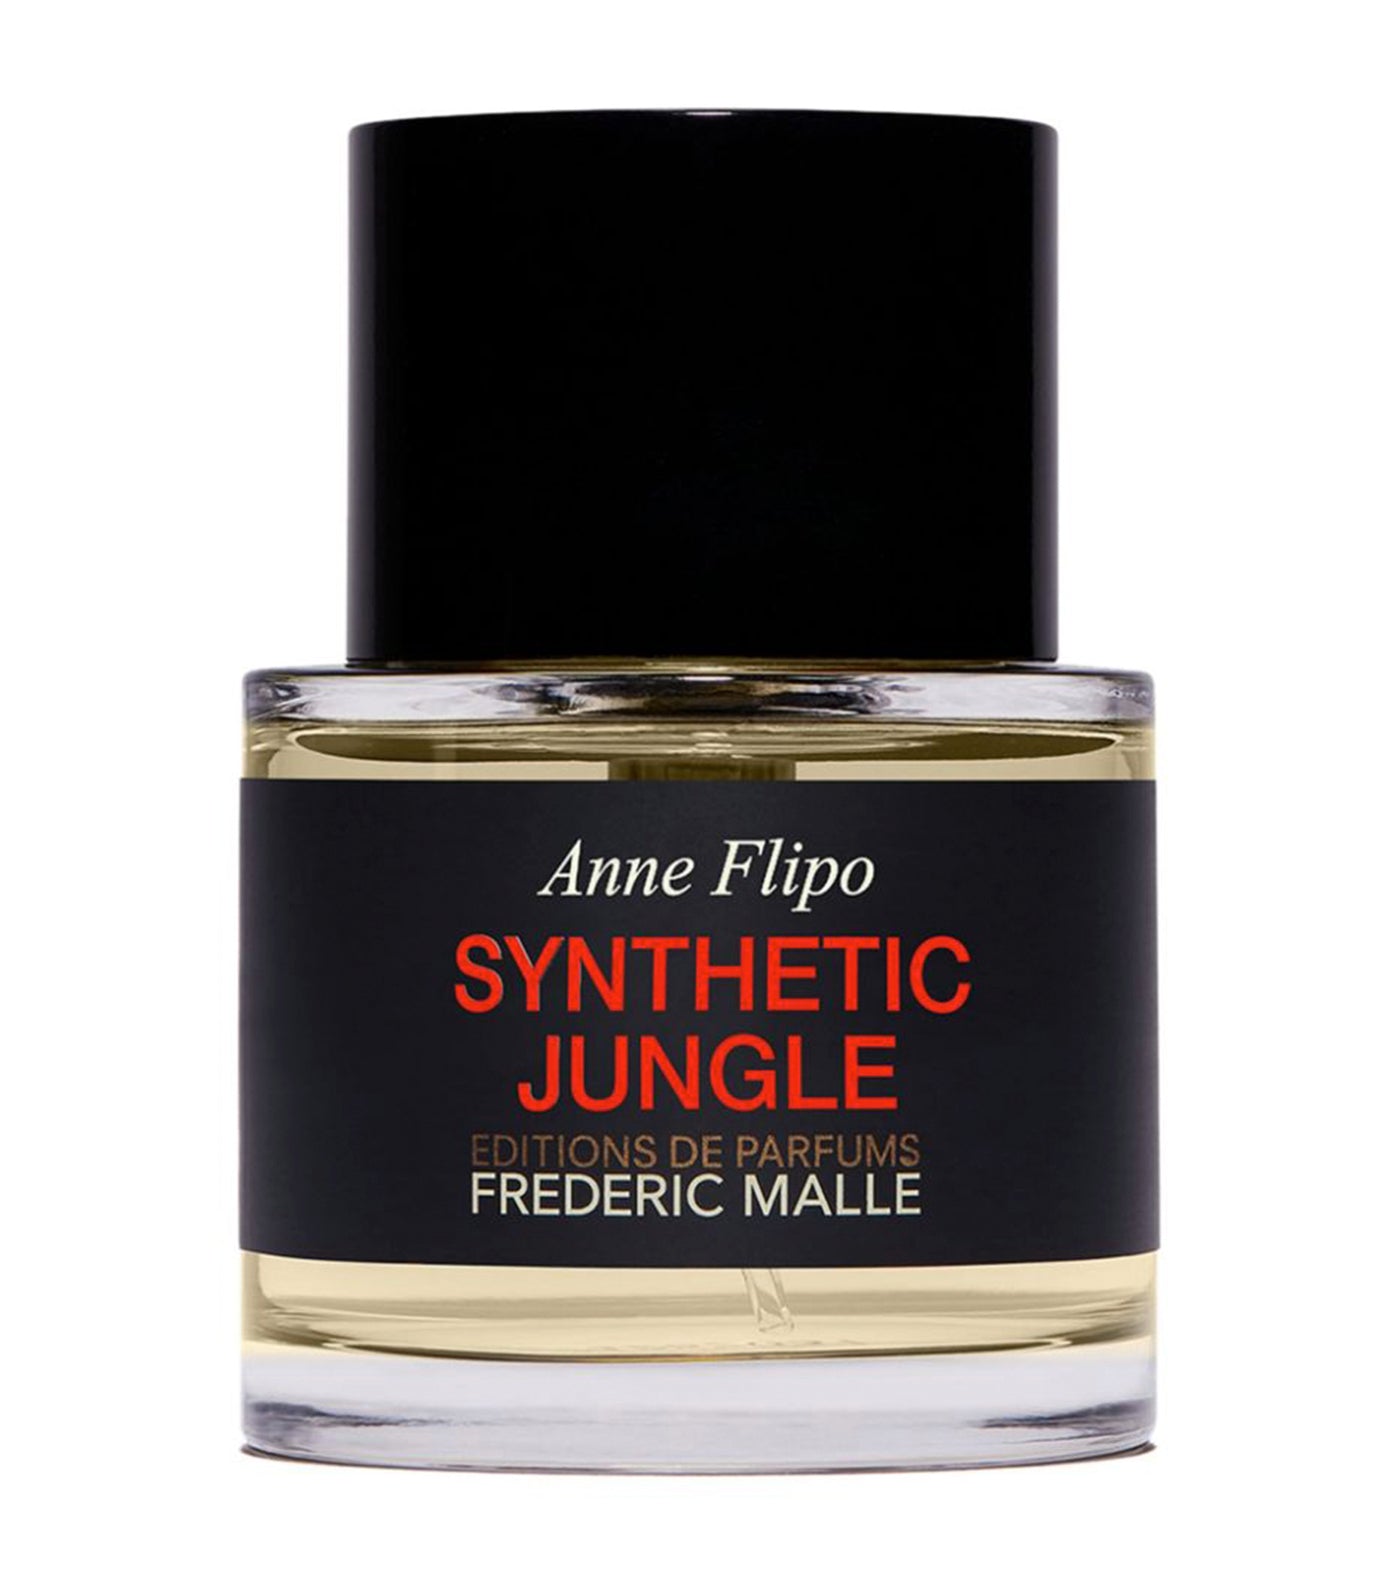 Synthetic Jungle by Anne Flipo